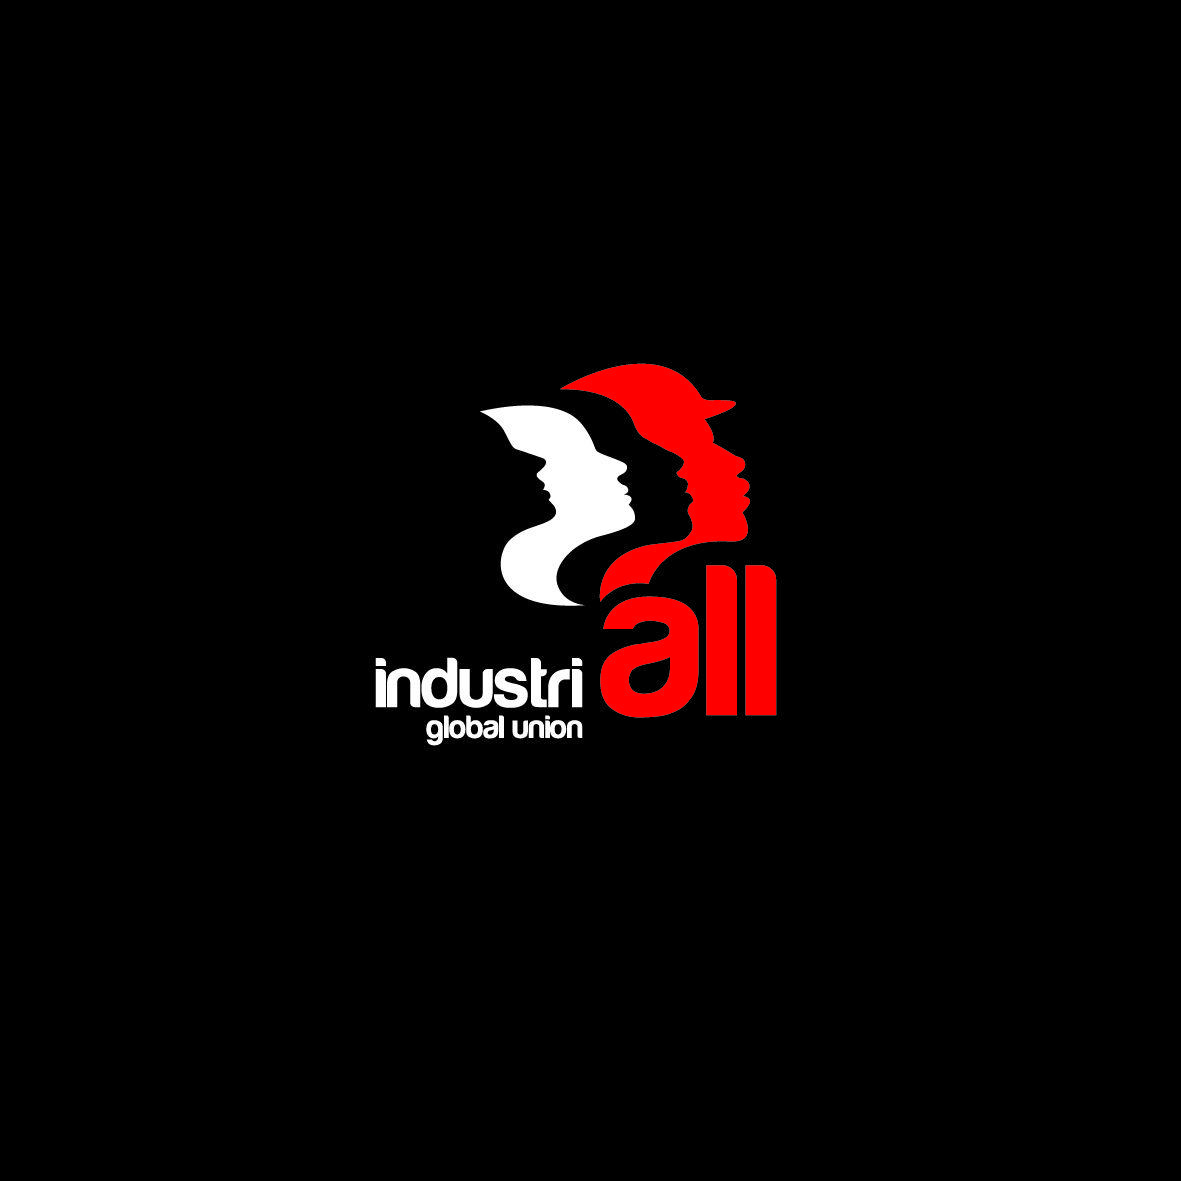 Union Logo - Logos of IndustriALL Global Union | IndustriALL